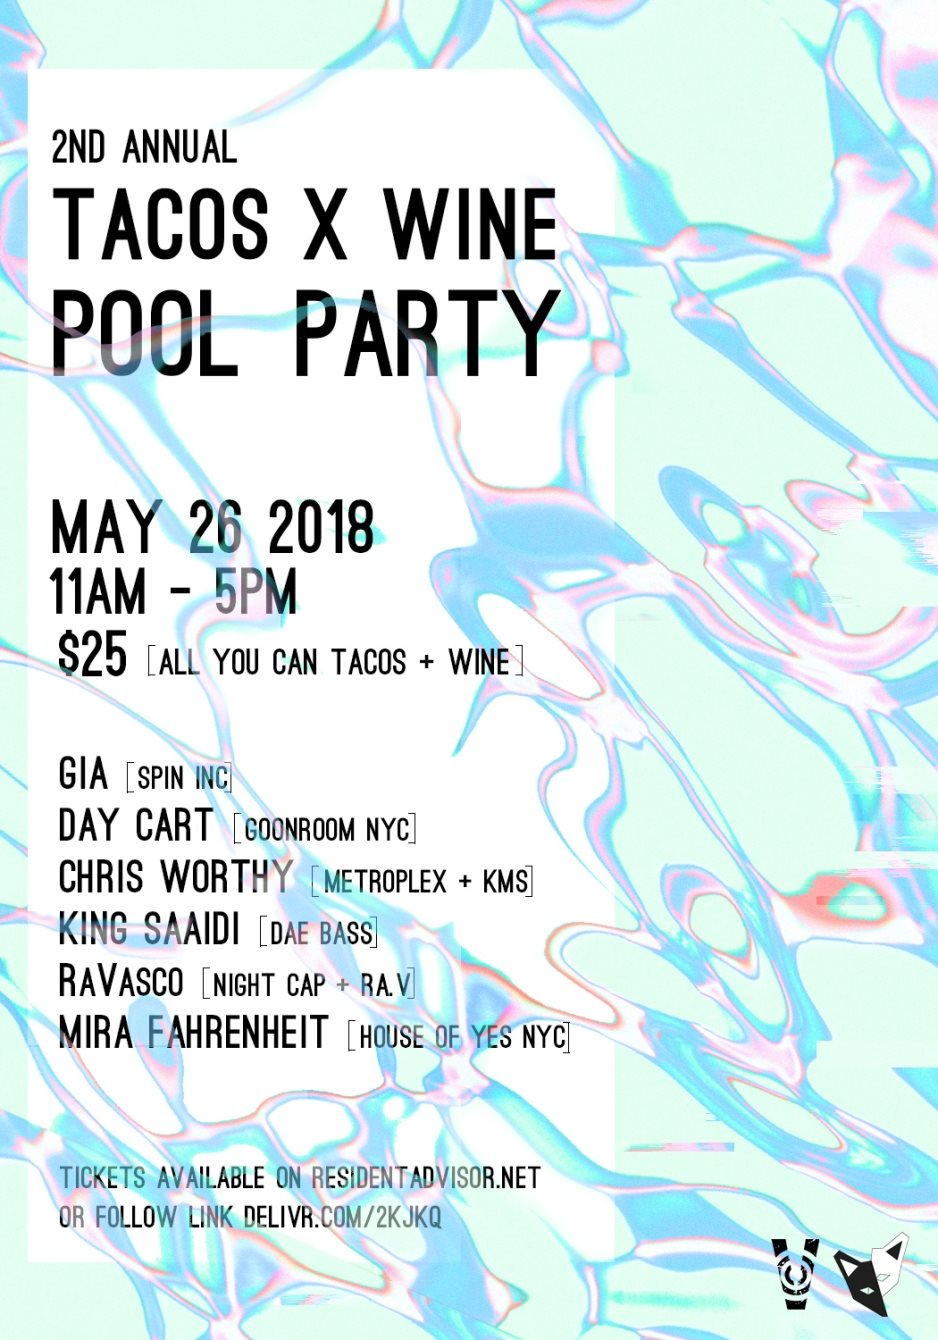 2nd Annual Tacos x Wine: Pool Party - Flyer front